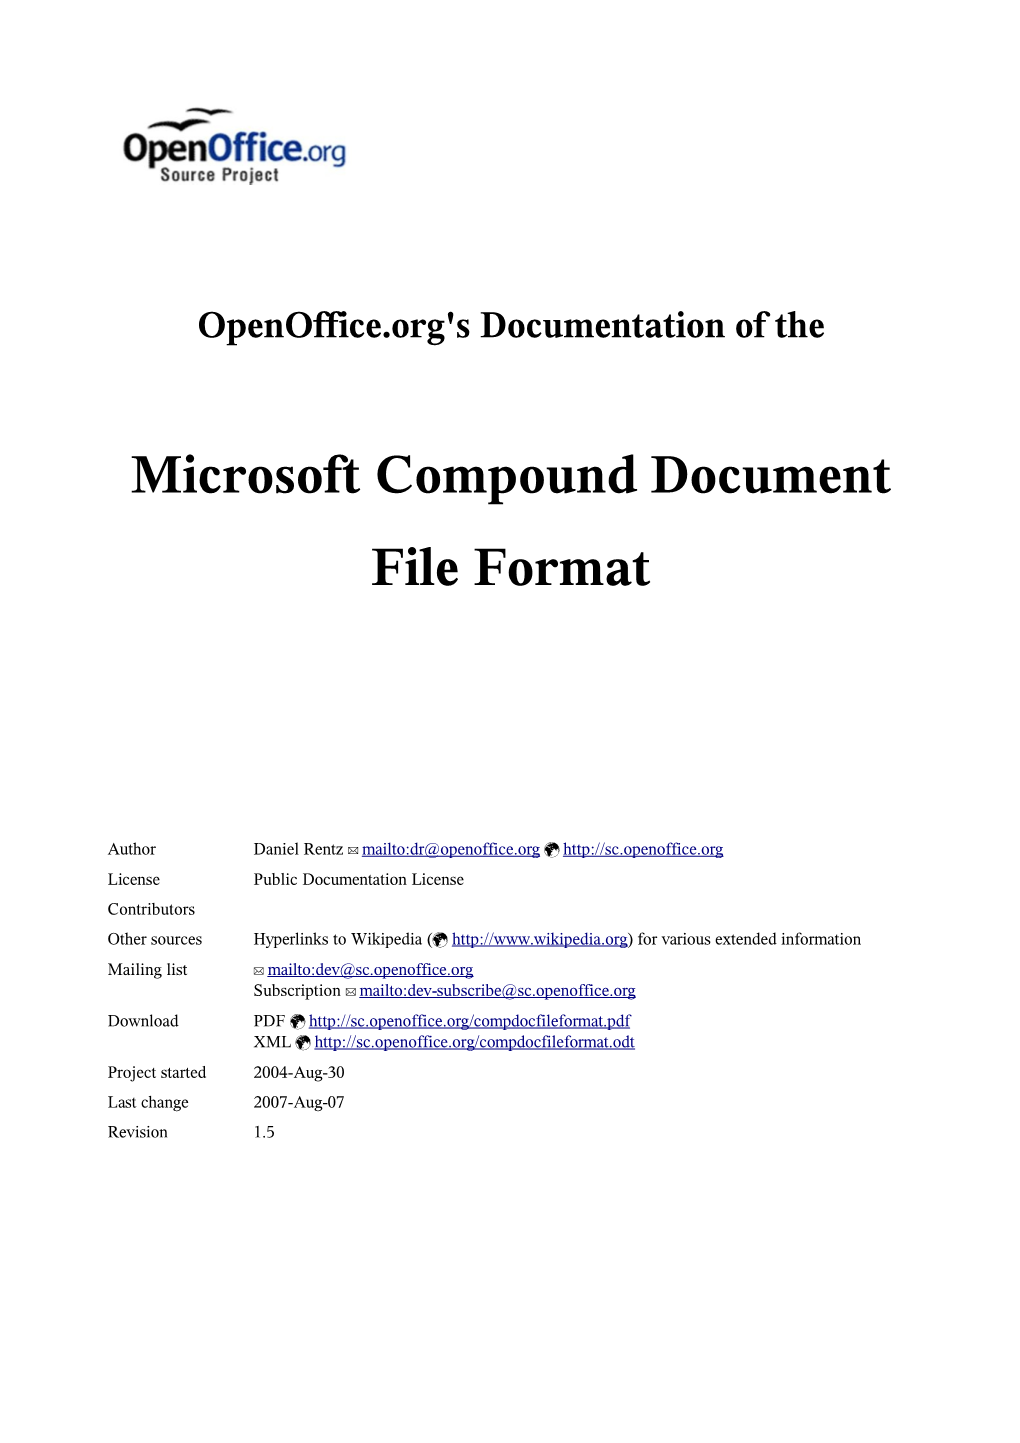 The Microsoft Compound Document File Format"